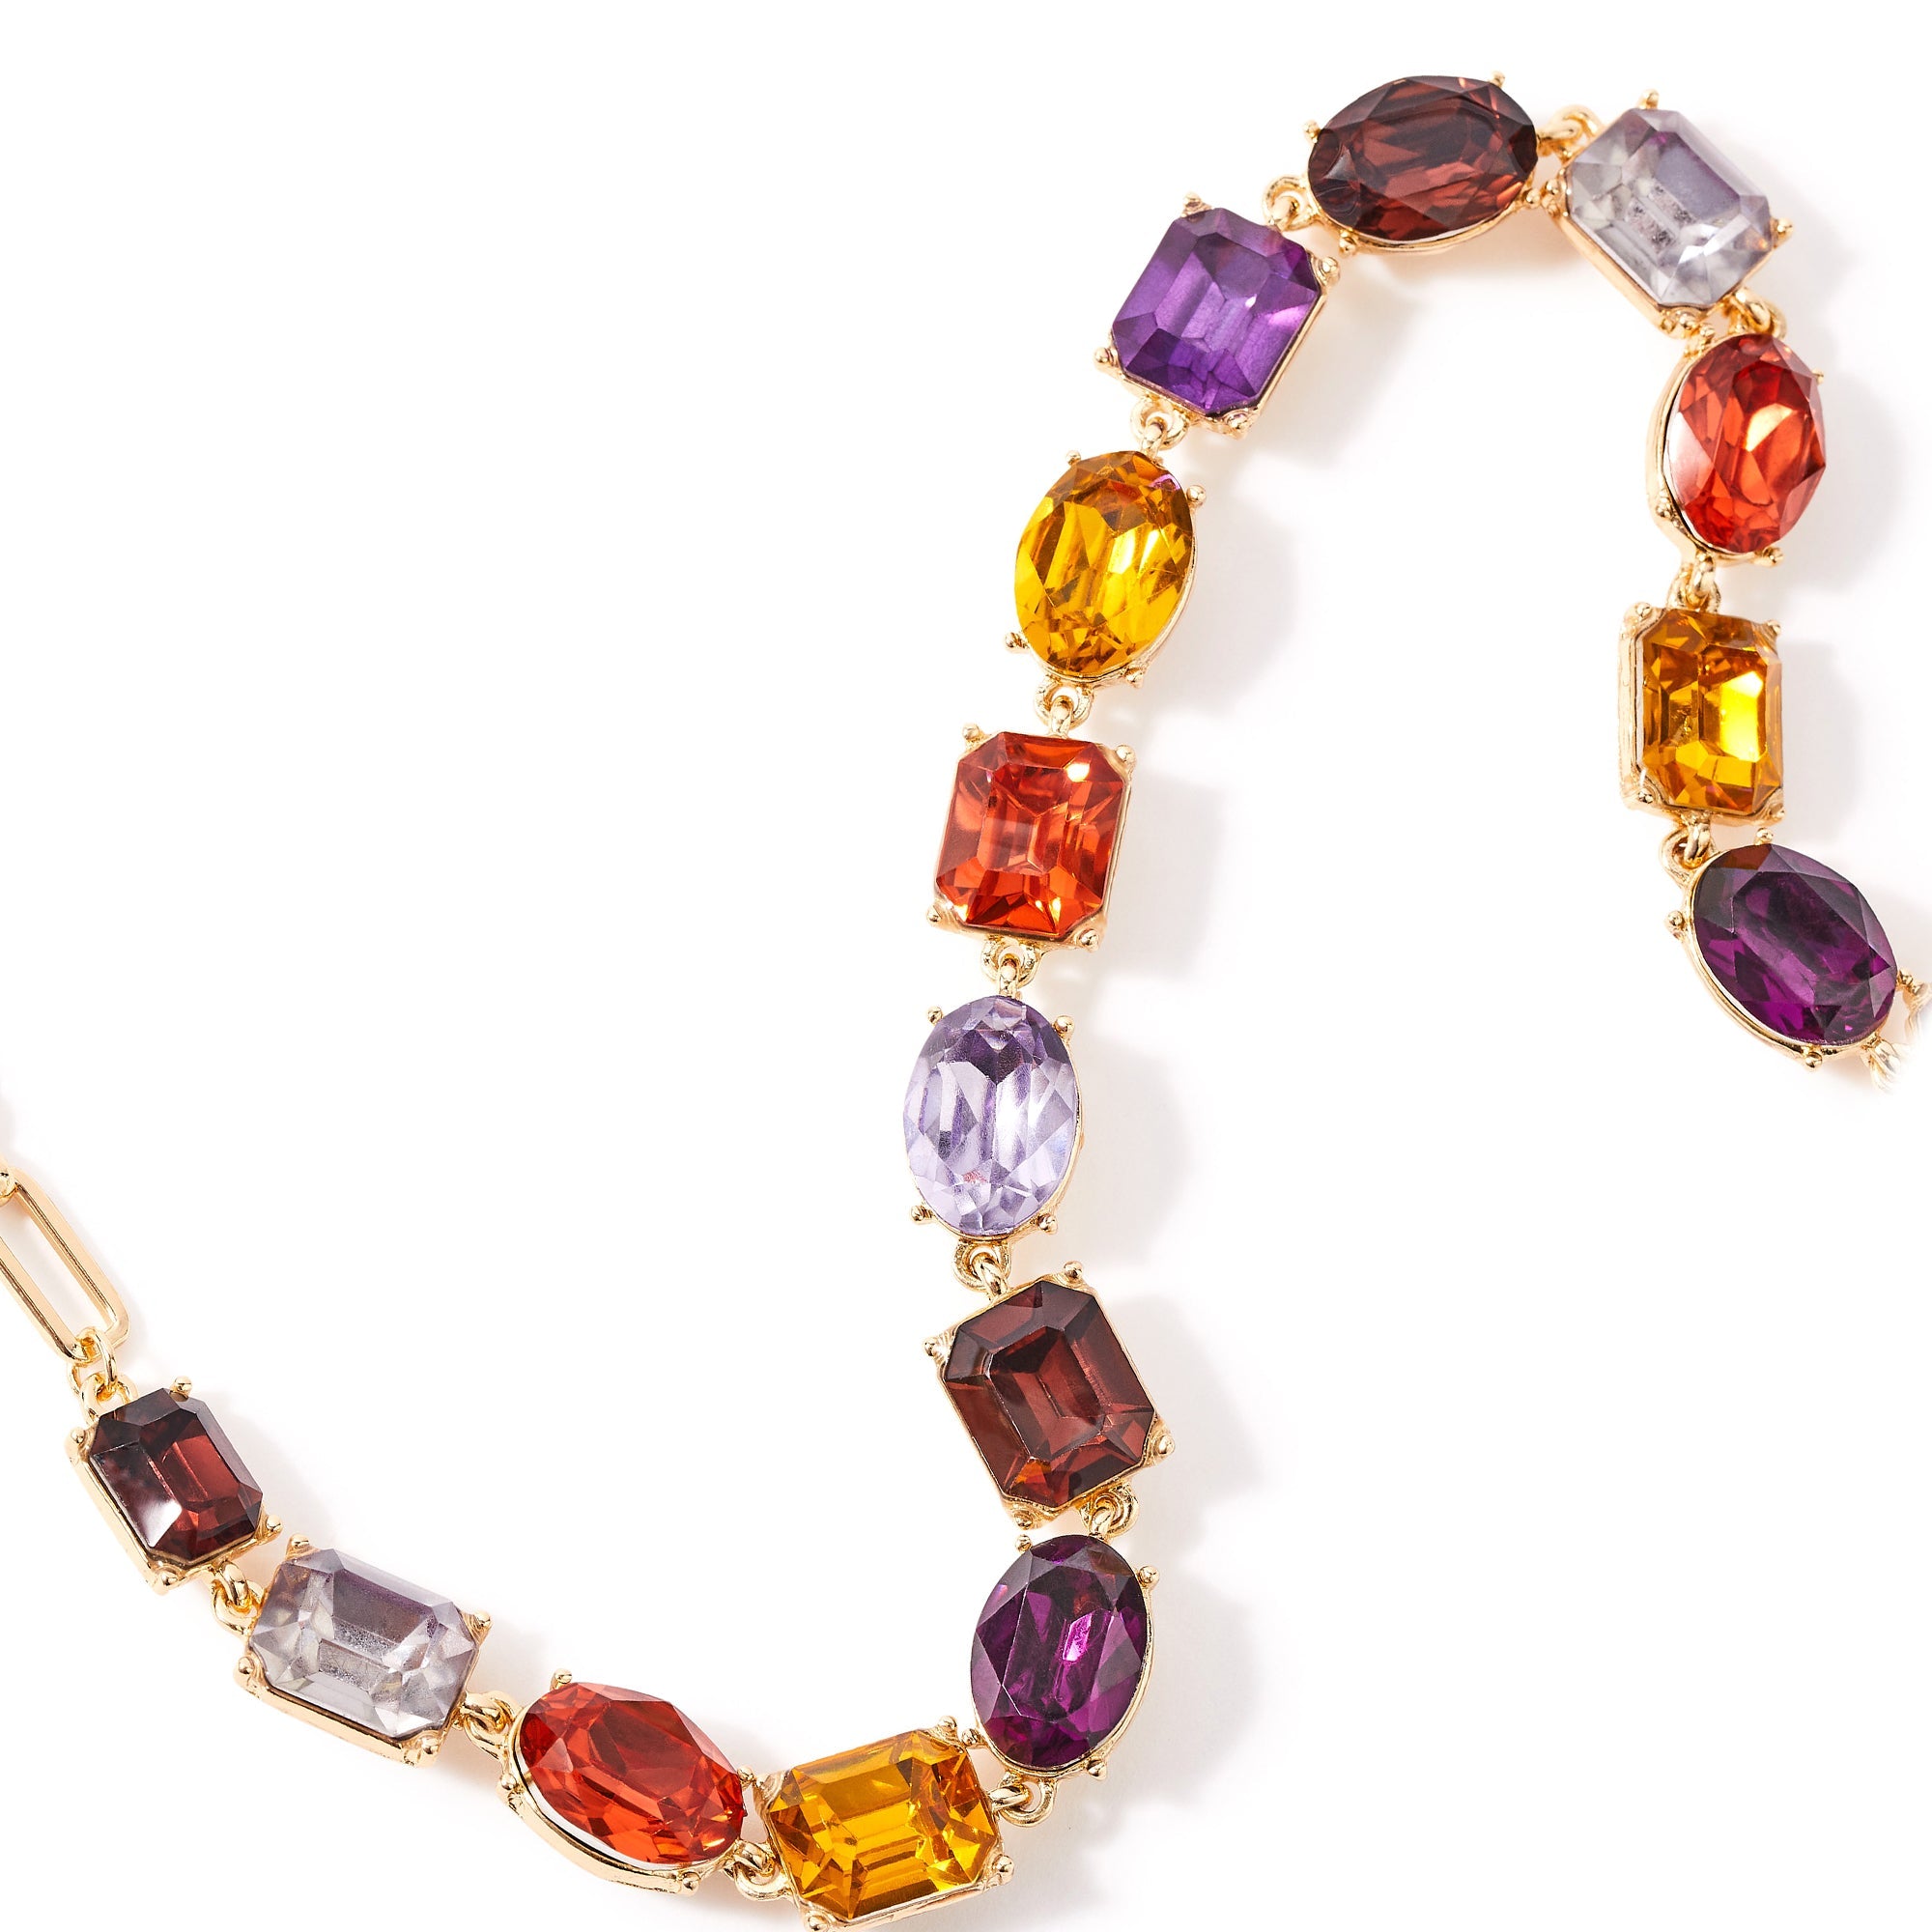 Amber Eclectic Stones Statement Necklace